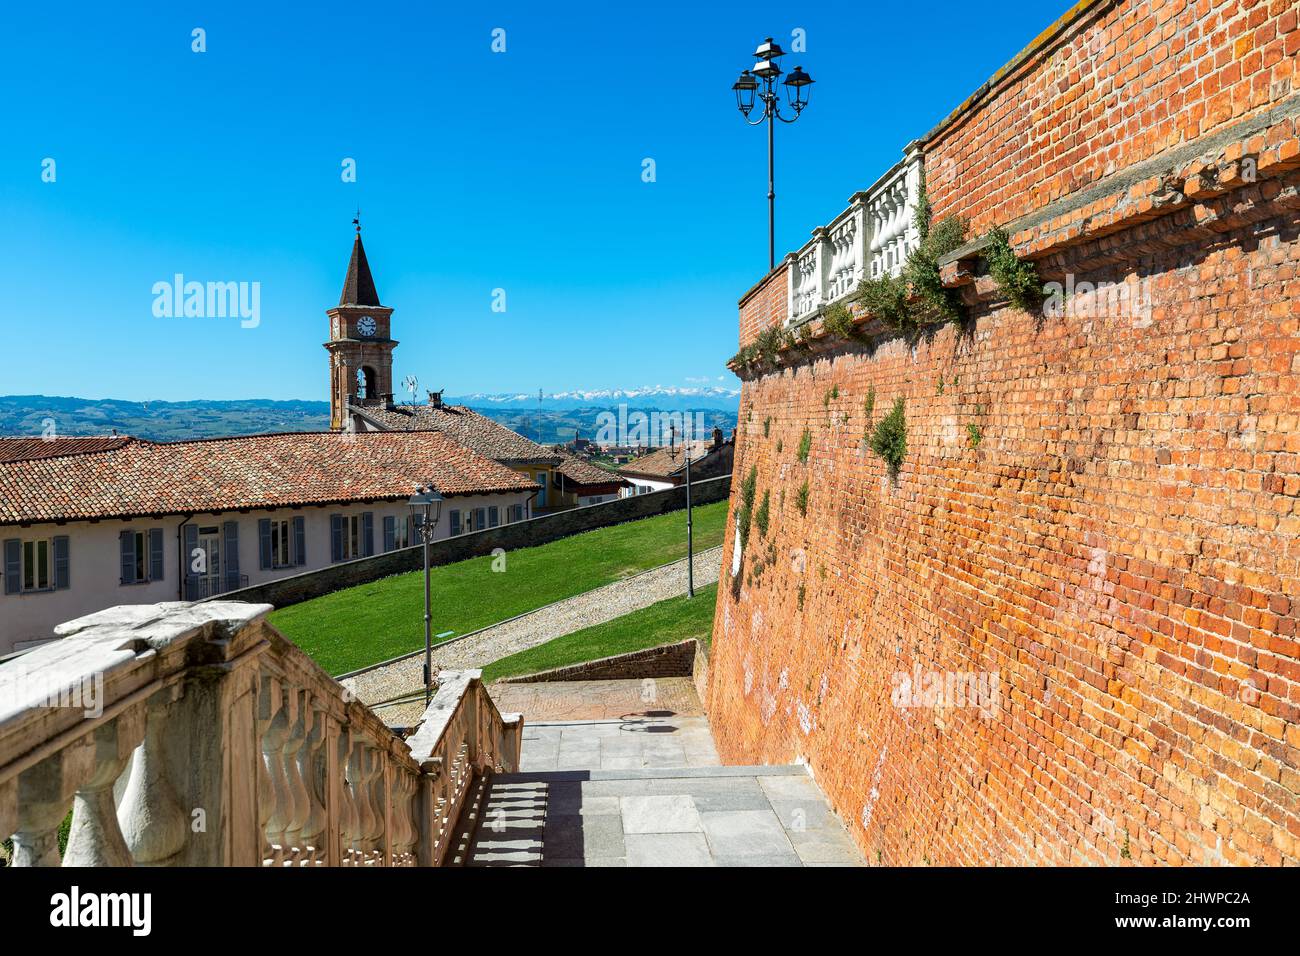 View of old brick wall, houses and belfry under blue sky in small town of Govone in Piedmont, Northern Italy. Stock Photo